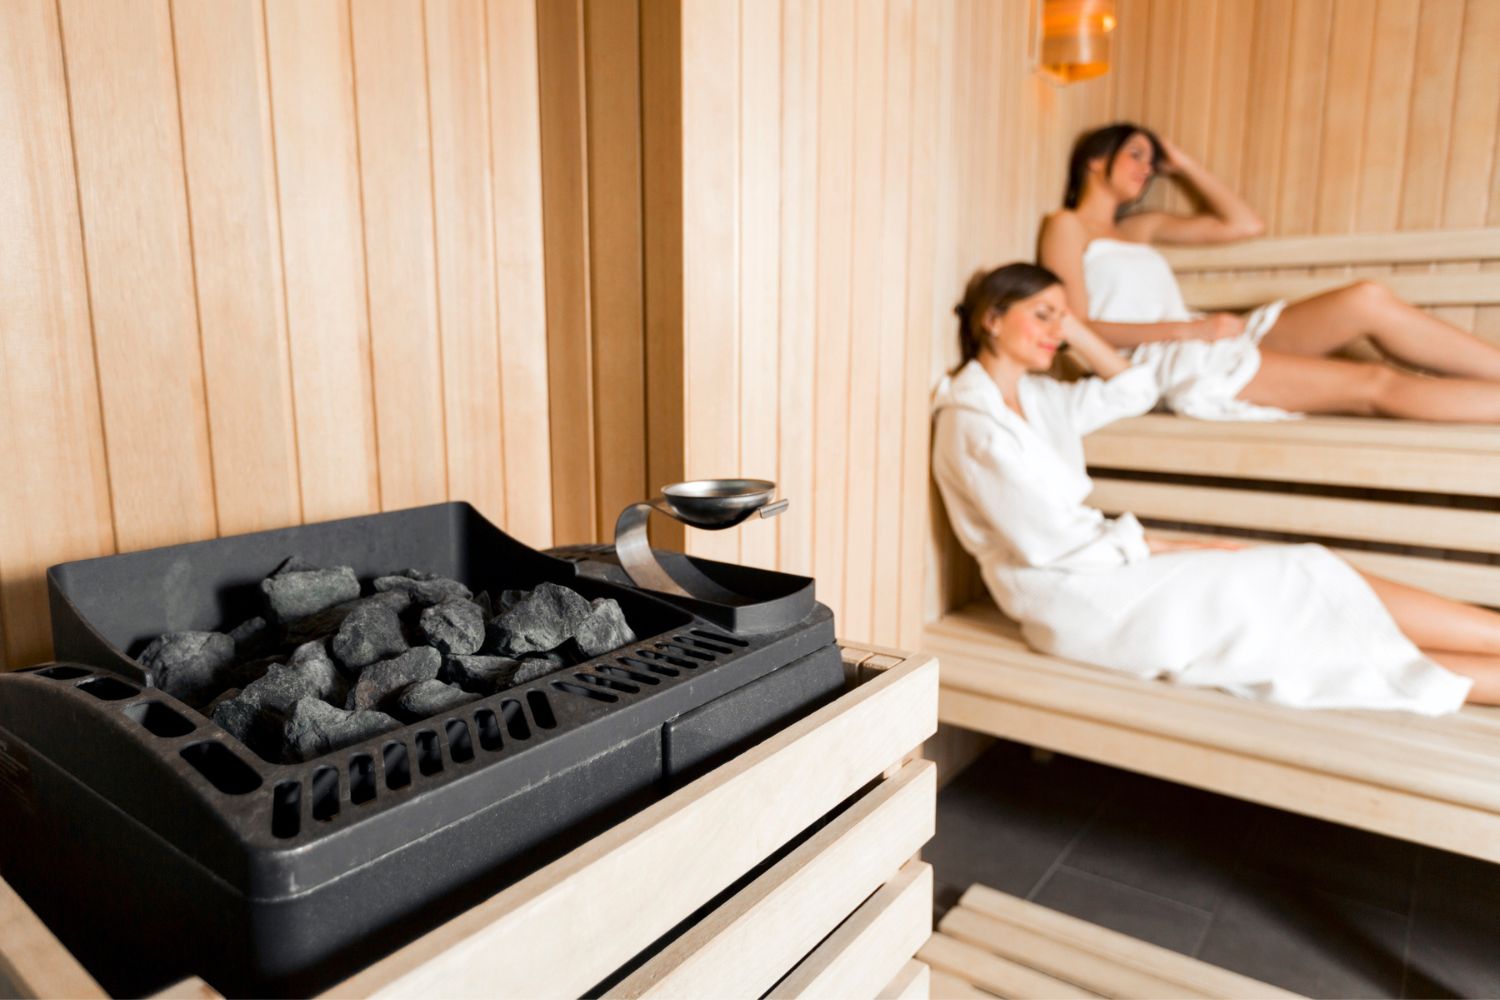 How Much Does a Home Sauna Cost to Install